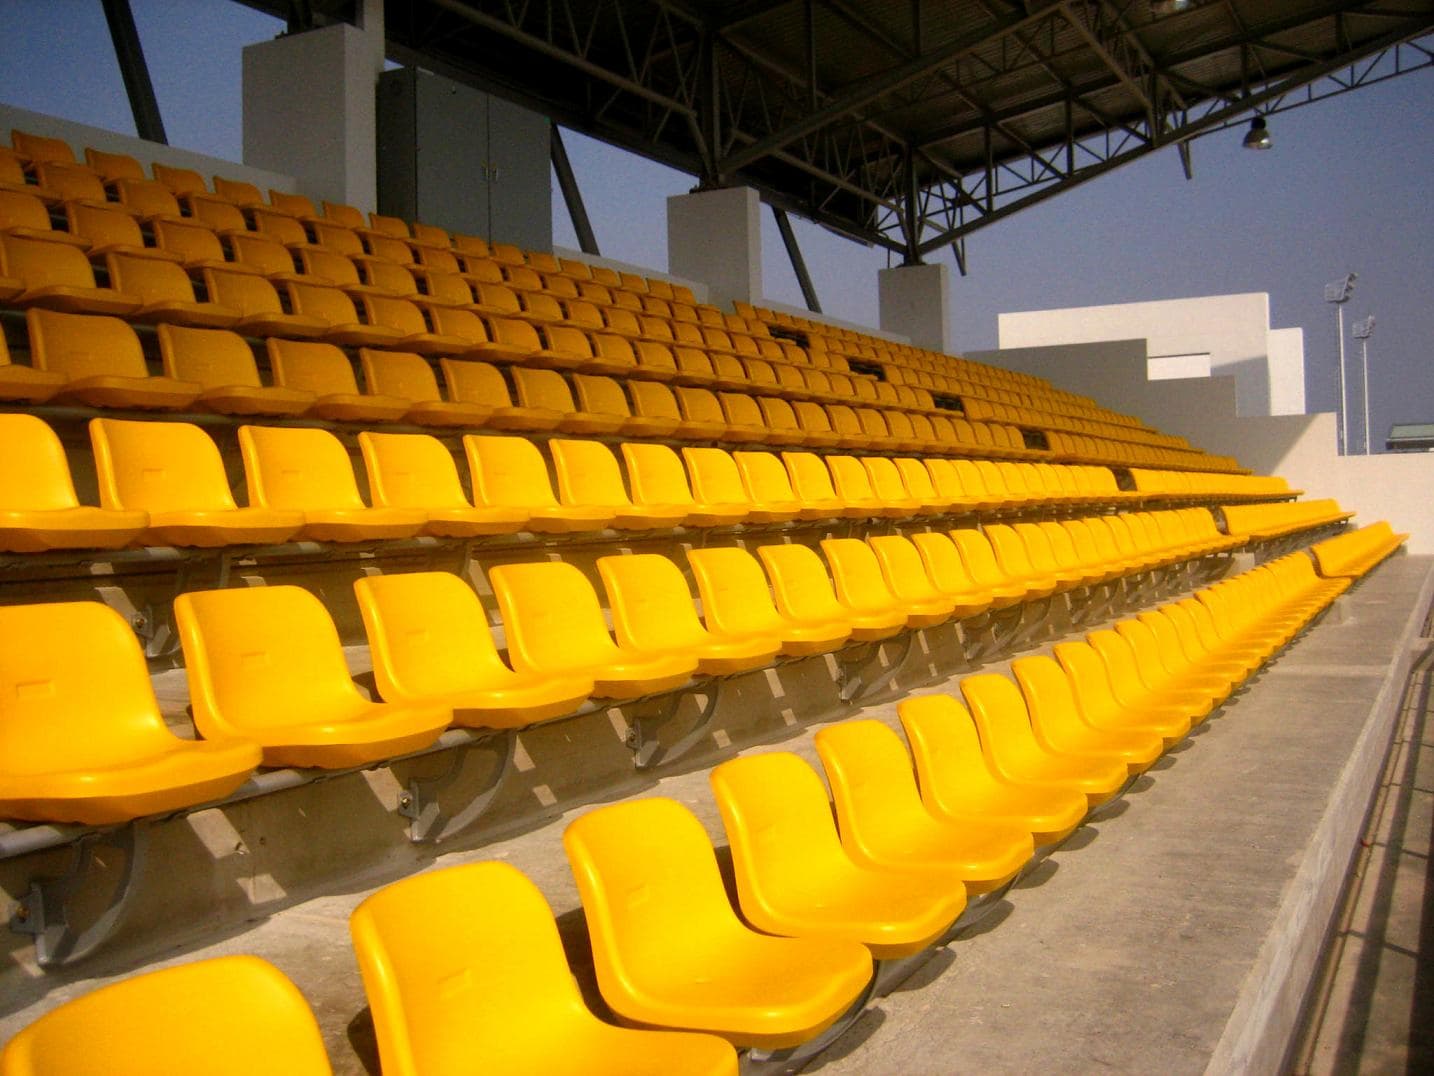 arena anti-aging retractable seating system,telescopic chair,stadium seating for public sports